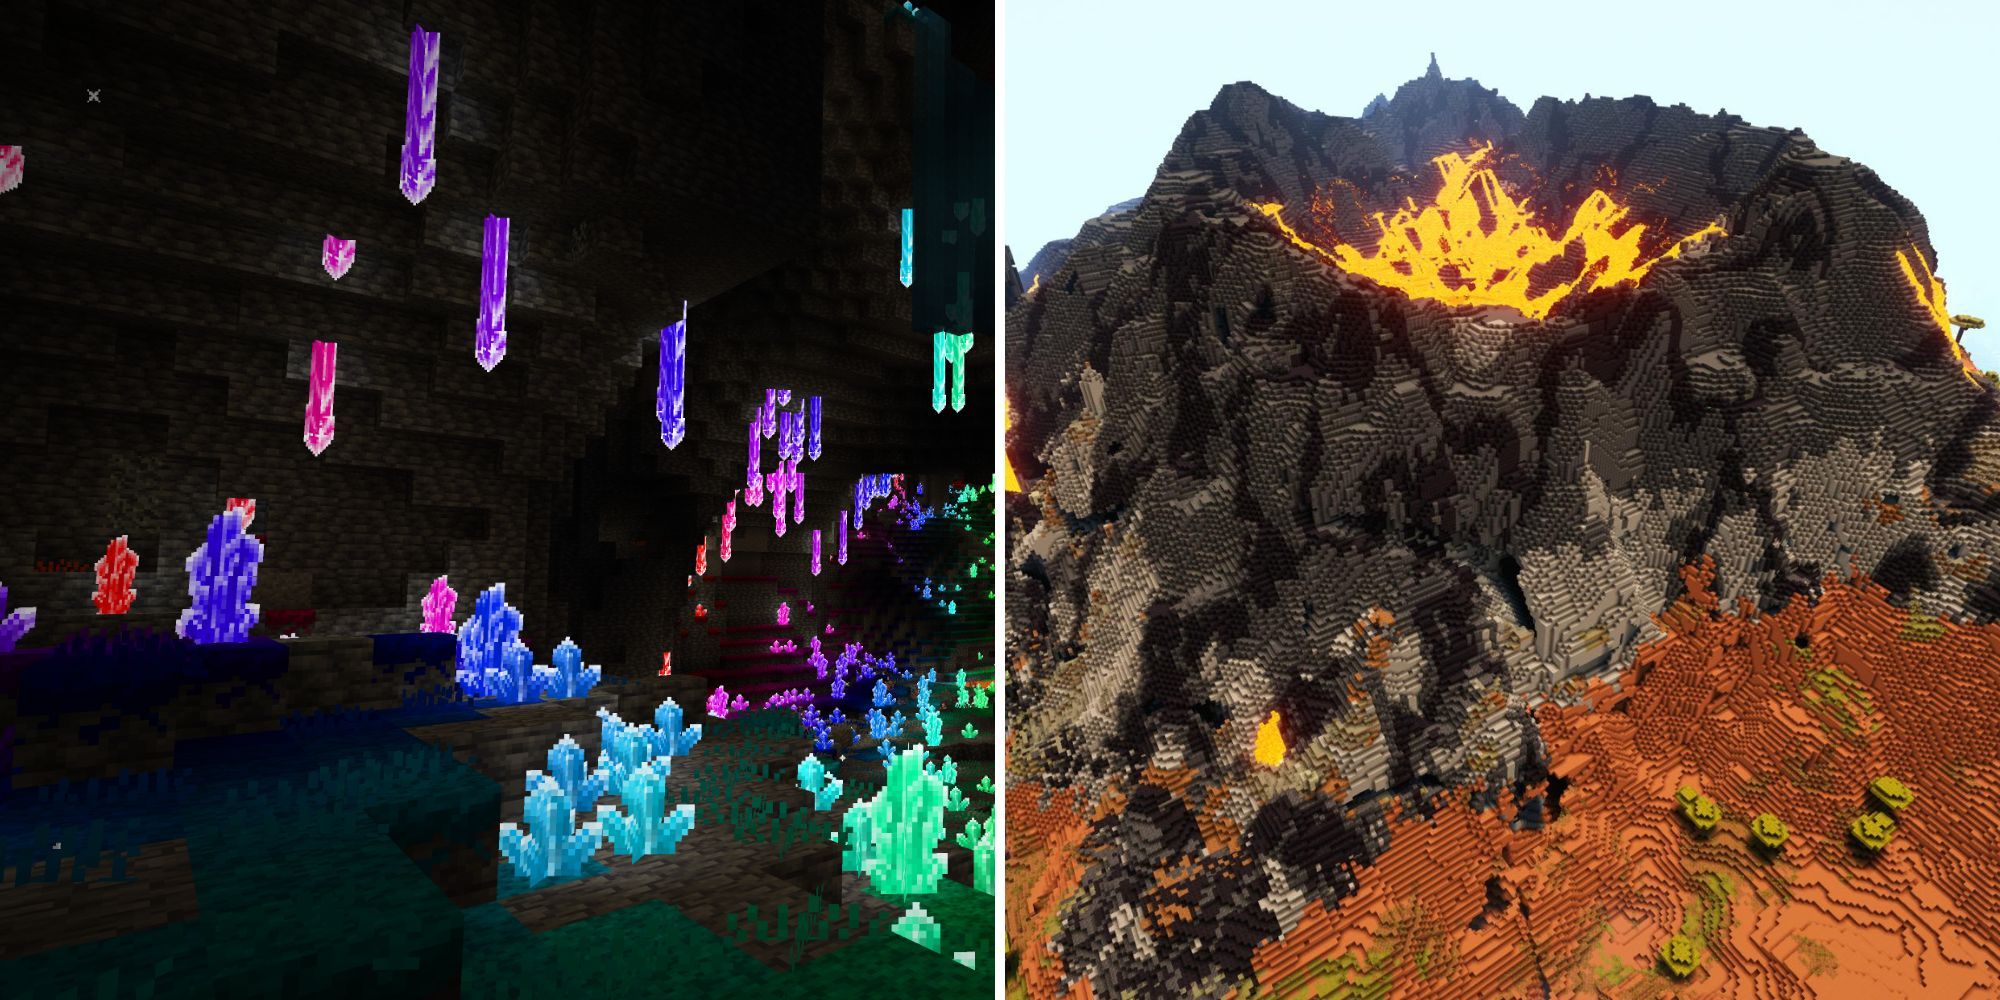 A split image of a cave with bright, glowing, purple, red, green, and blue crystals, and an aerial view of a giant volcano full of lava.